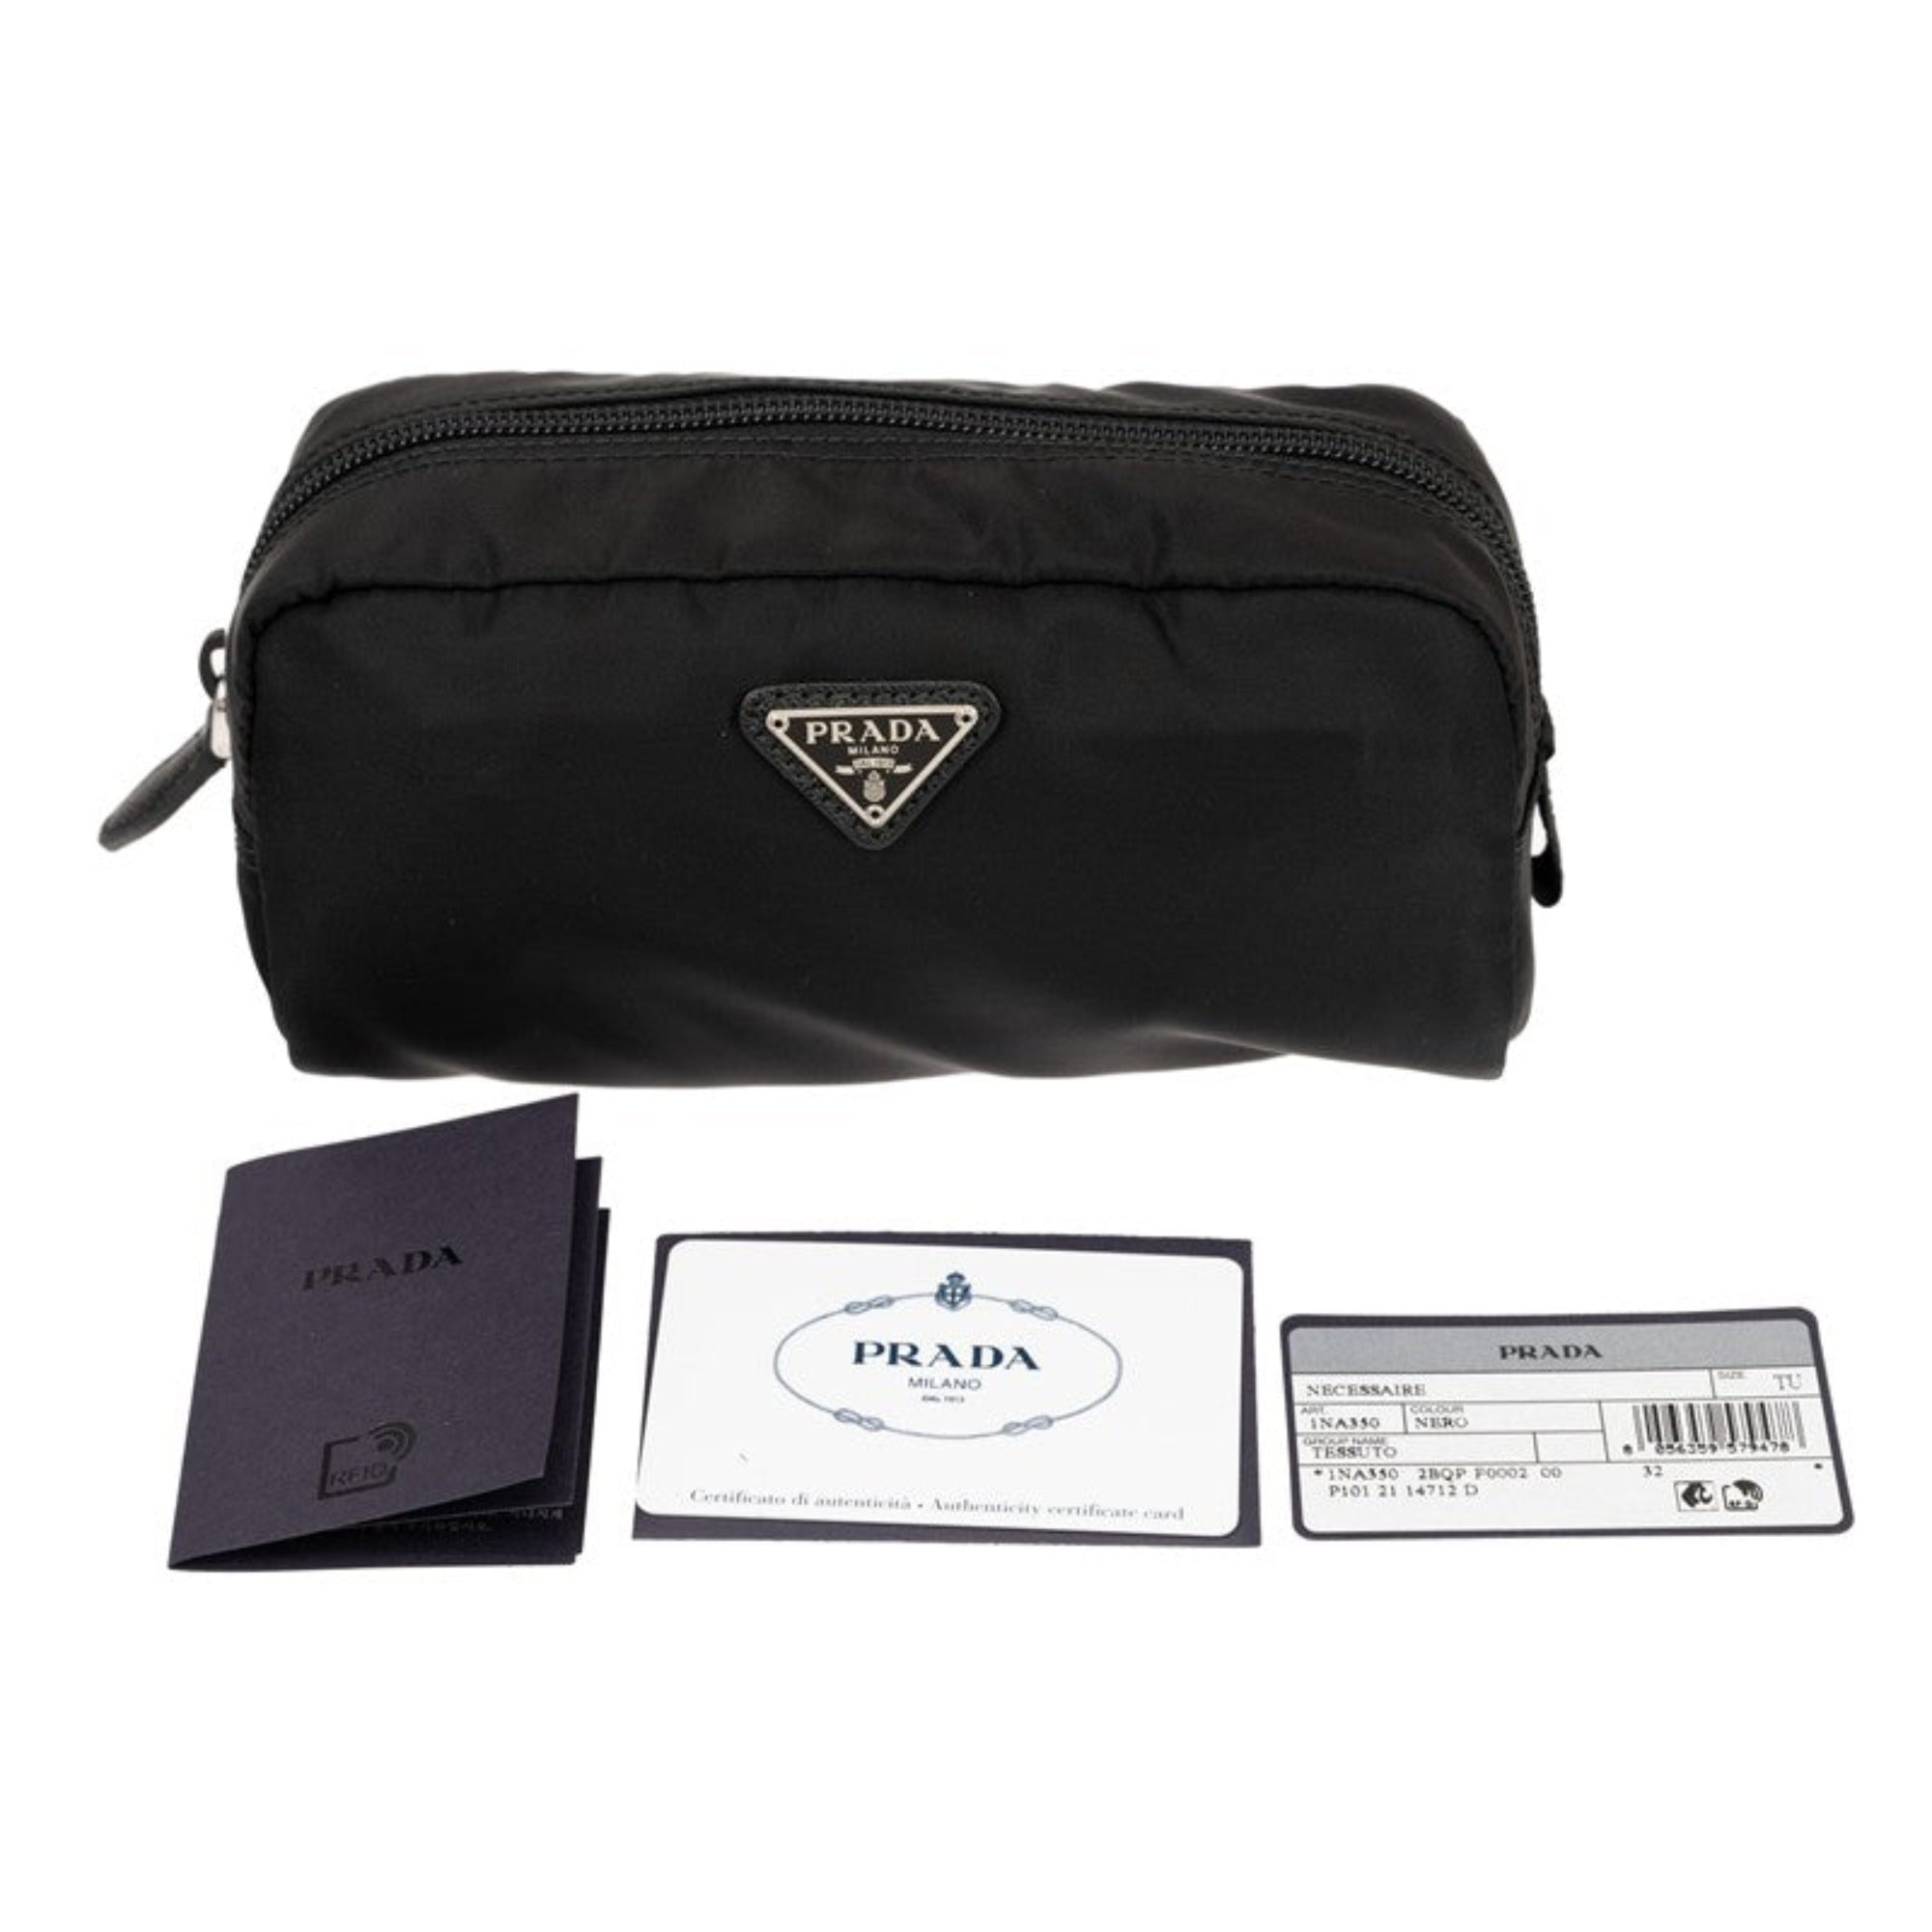 Prada Tessuto Nylon Black Cosmetic Case Necessaire Bag 1NA350 at_Queen_Bee_of_Beverly_Hills